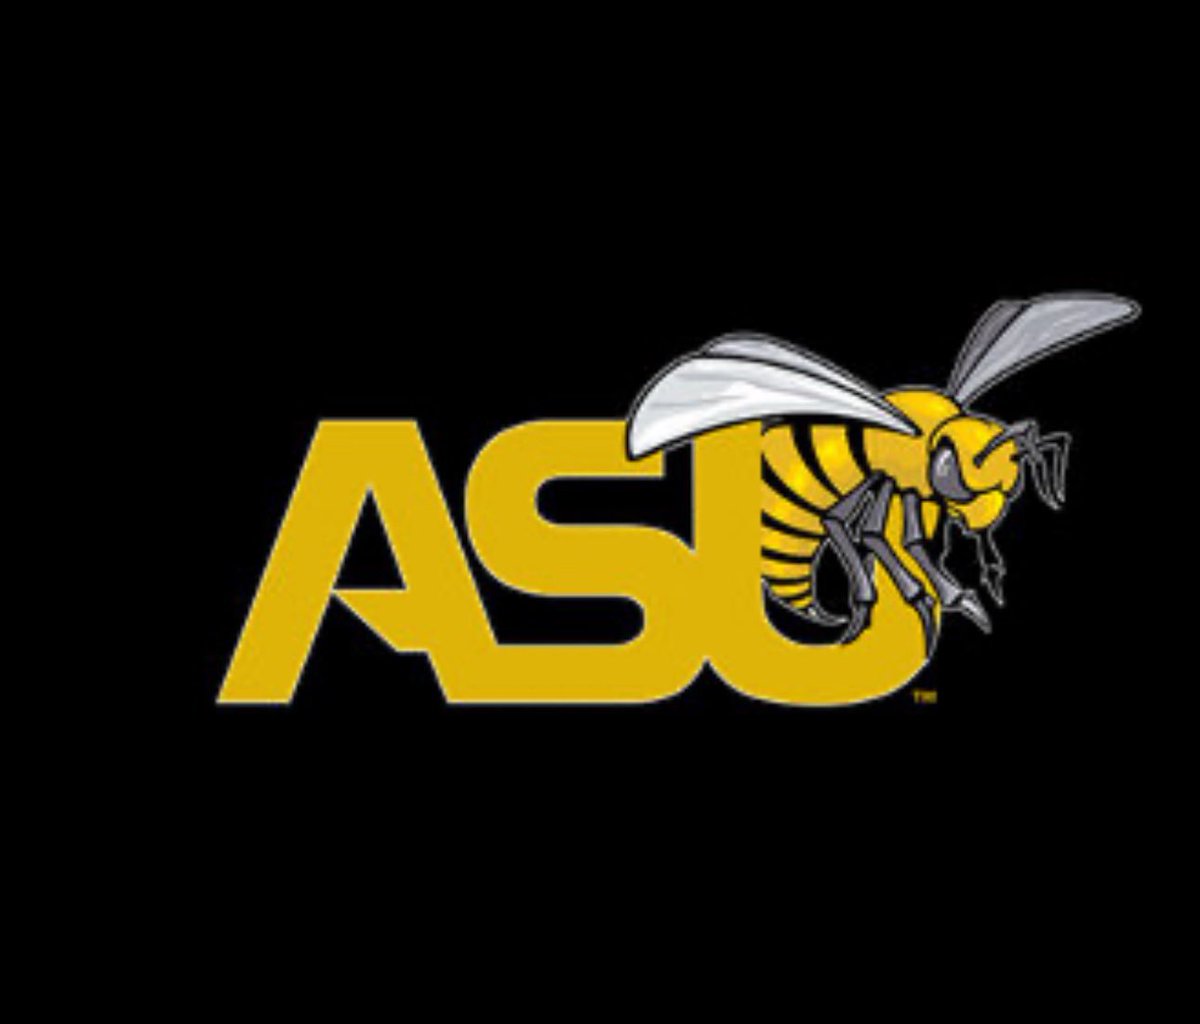 After a great conversation with @CoachLockdown23 I am blessed to receive an 🅾️FFER from Alabama State University 💛🖤 @MarshallMcDuf14 @MohrRecruiting @BHoward_11 @ChadSimmons_ @adamgorney @JohnGarcia_Jr @MrAlready11